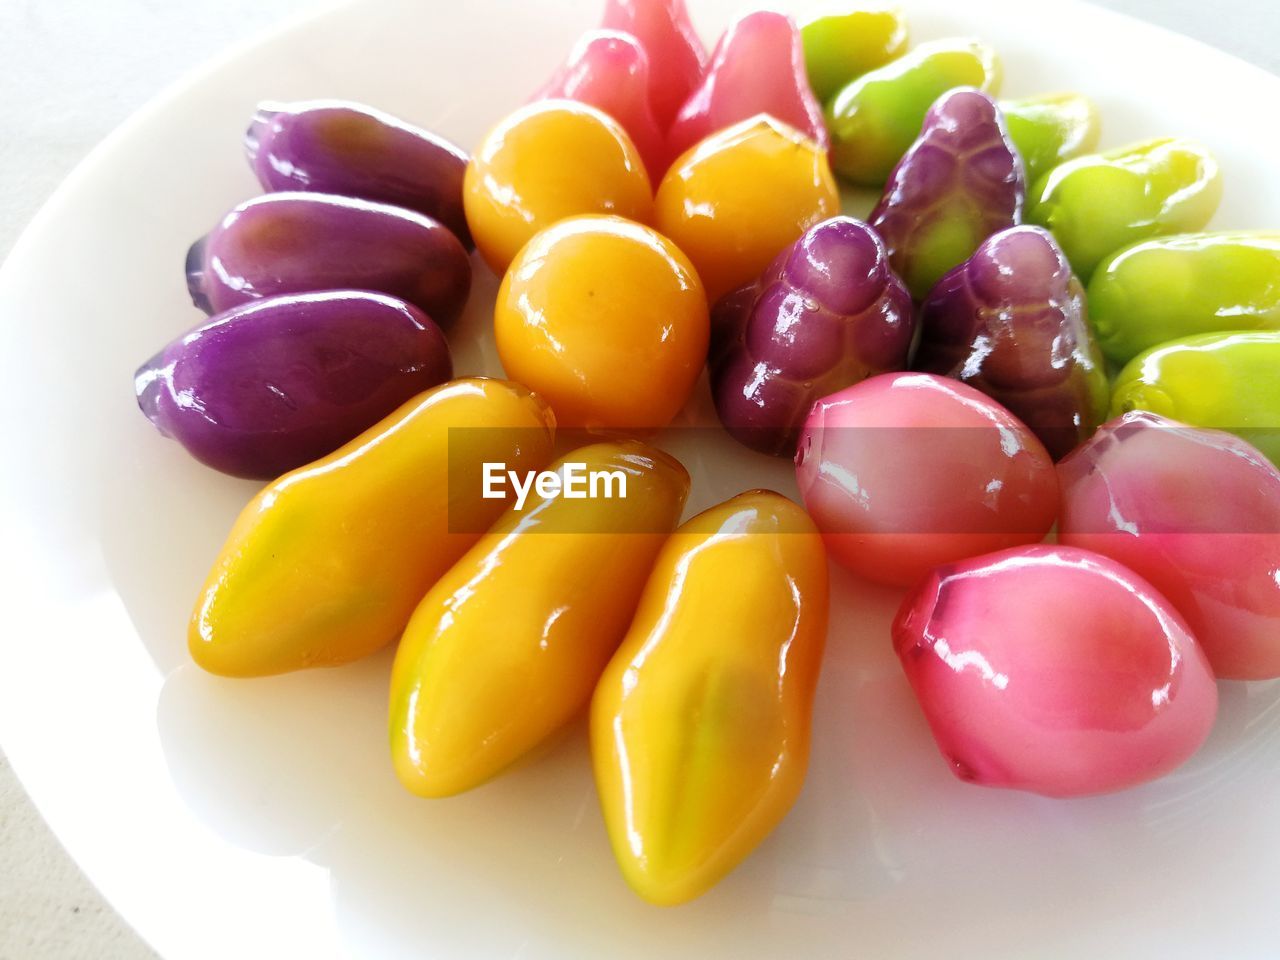 HIGH ANGLE VIEW OF MULTI COLORED BELL PEPPERS IN PLATE